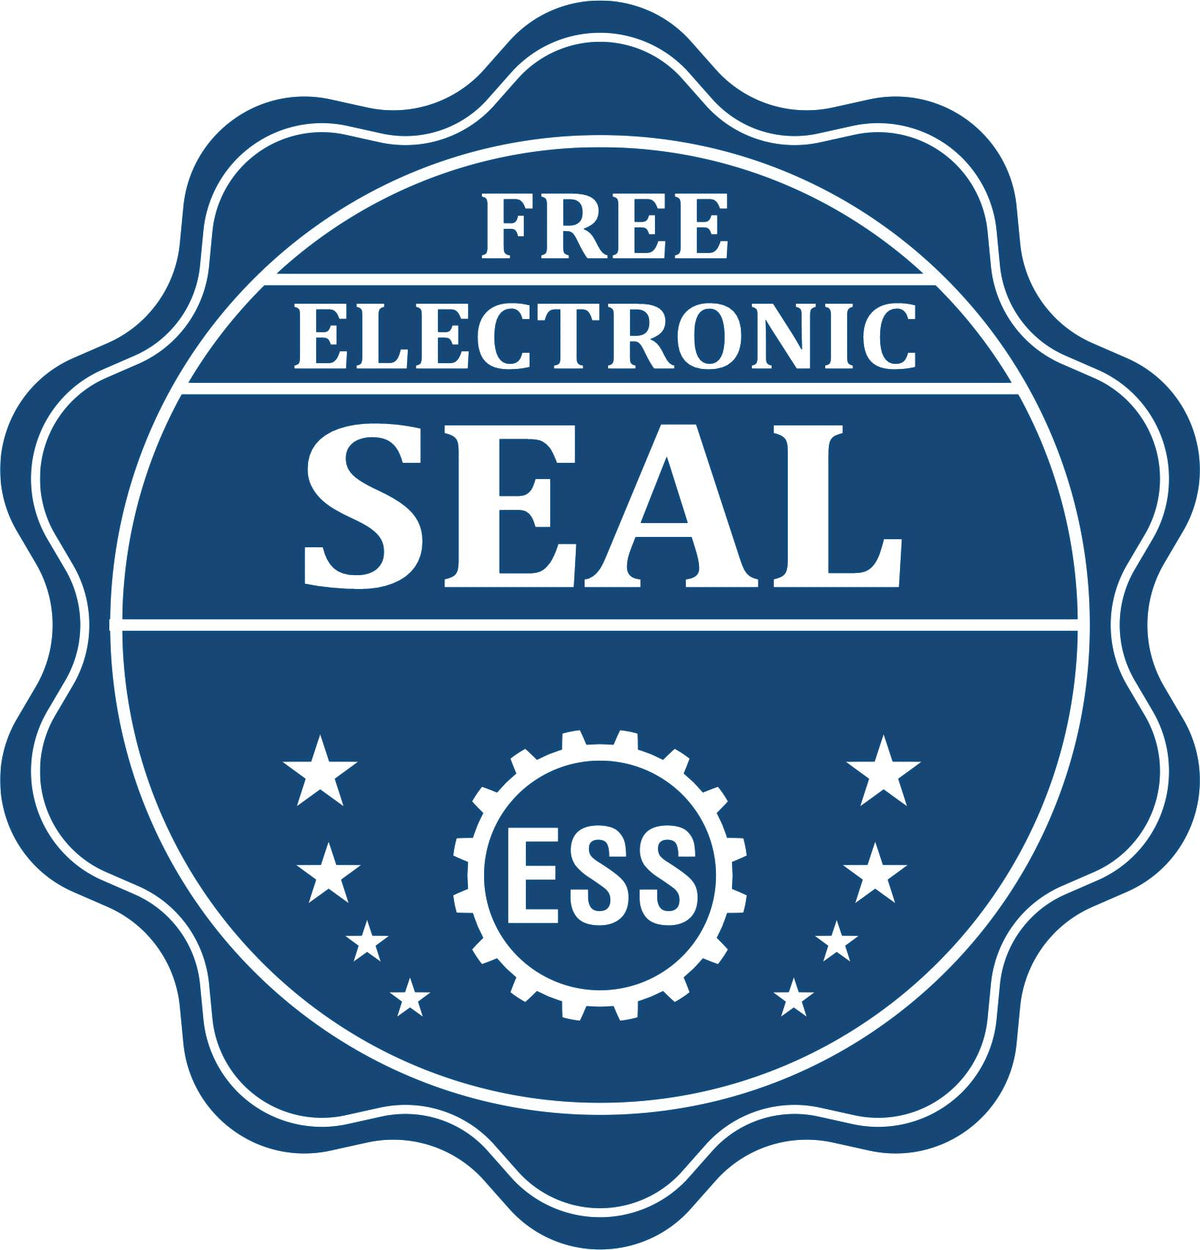 A badge showing a free electronic seal for the Soft Pocket Rhode Island Landscape Architect Embosser with stars and the ESS gear on the emblem.